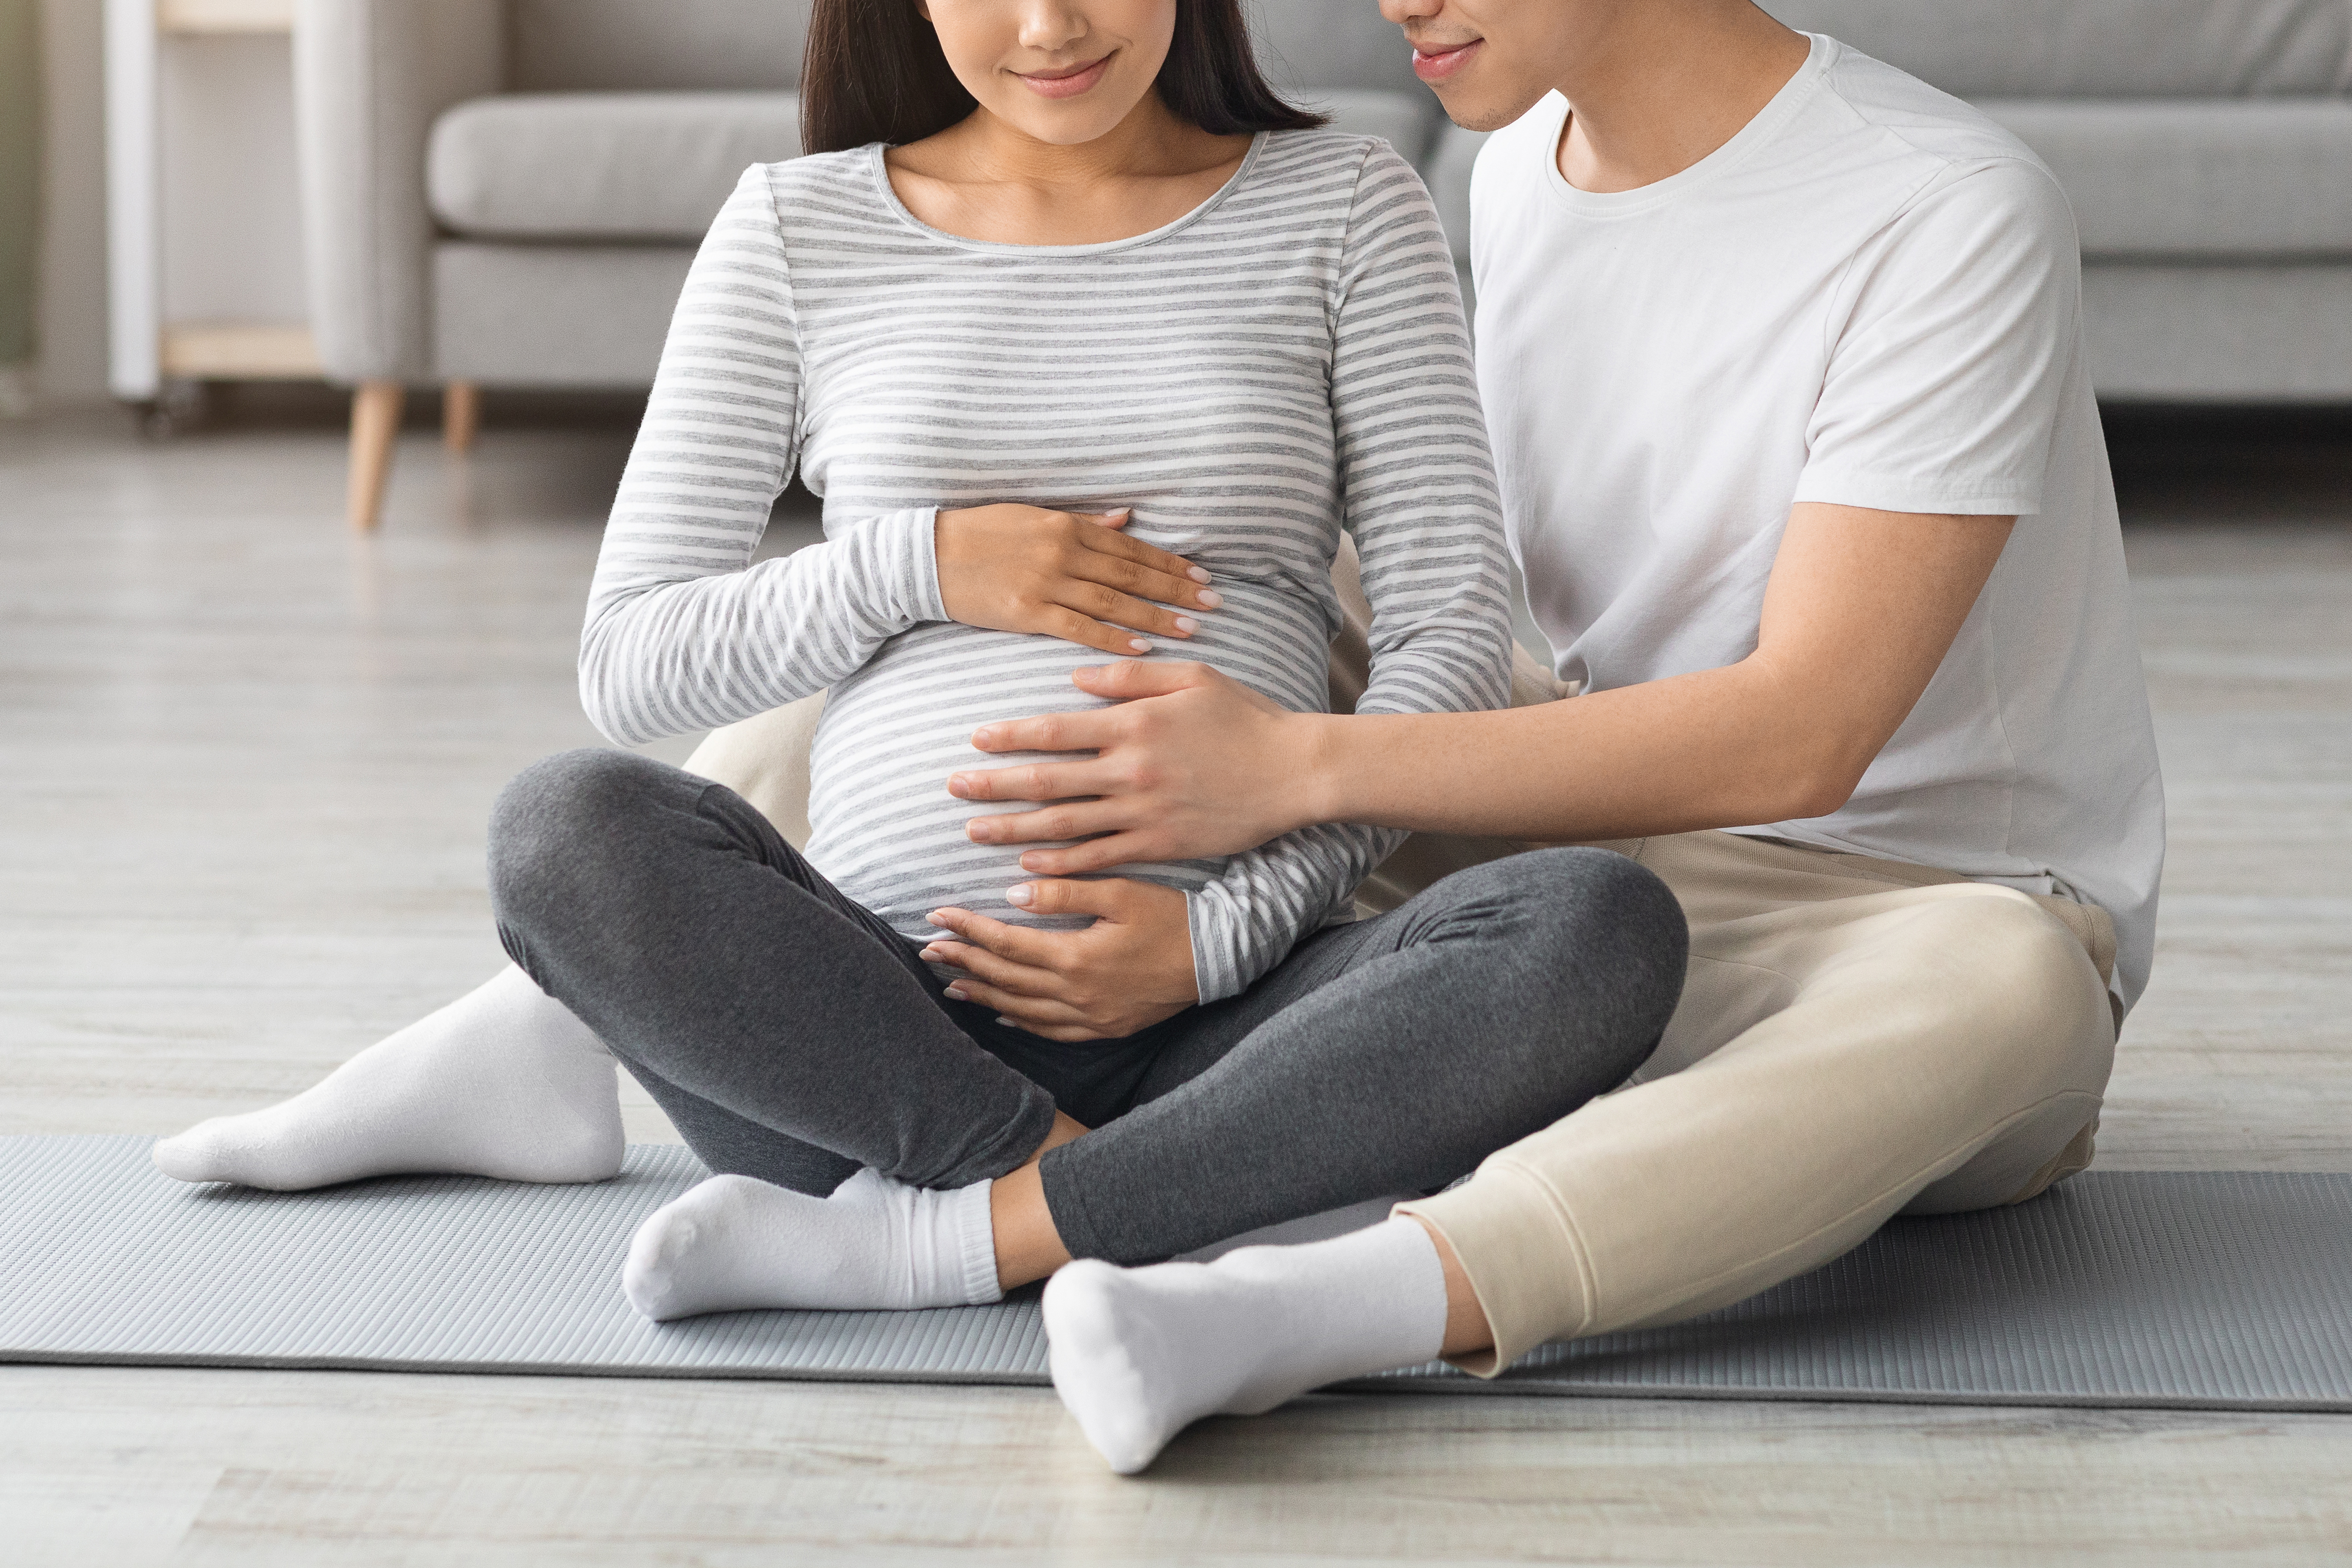 Man sitting with his pregnant wife on a yoga mat | Source: Shutterstock